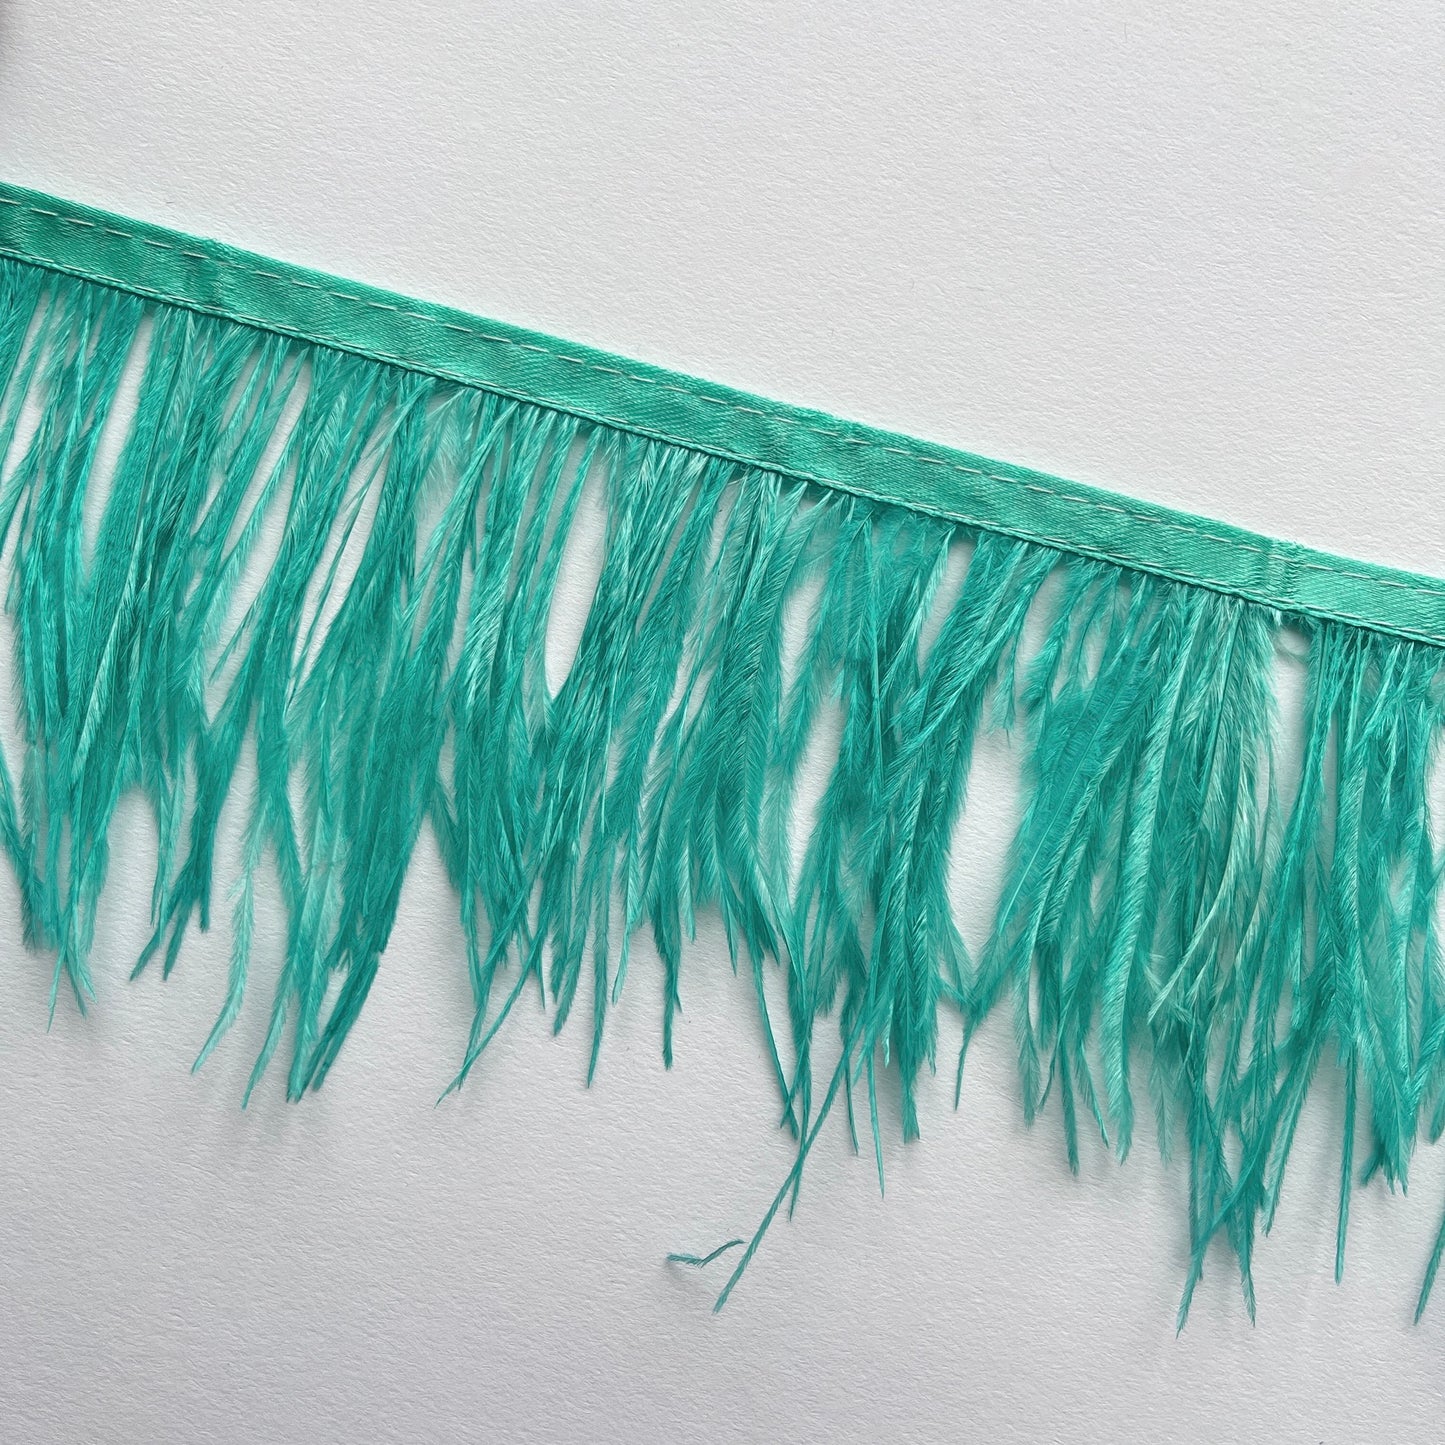 10cm deep Real ostrich feather fringe trim on a Satin ribbon for easy attachment. Would look incredible added to a jacket as a statement cuff!  Ideal for dressmaking, crafts, millinery, costumes, hat making, fascinators, bridal accessories, headpieces, bags.